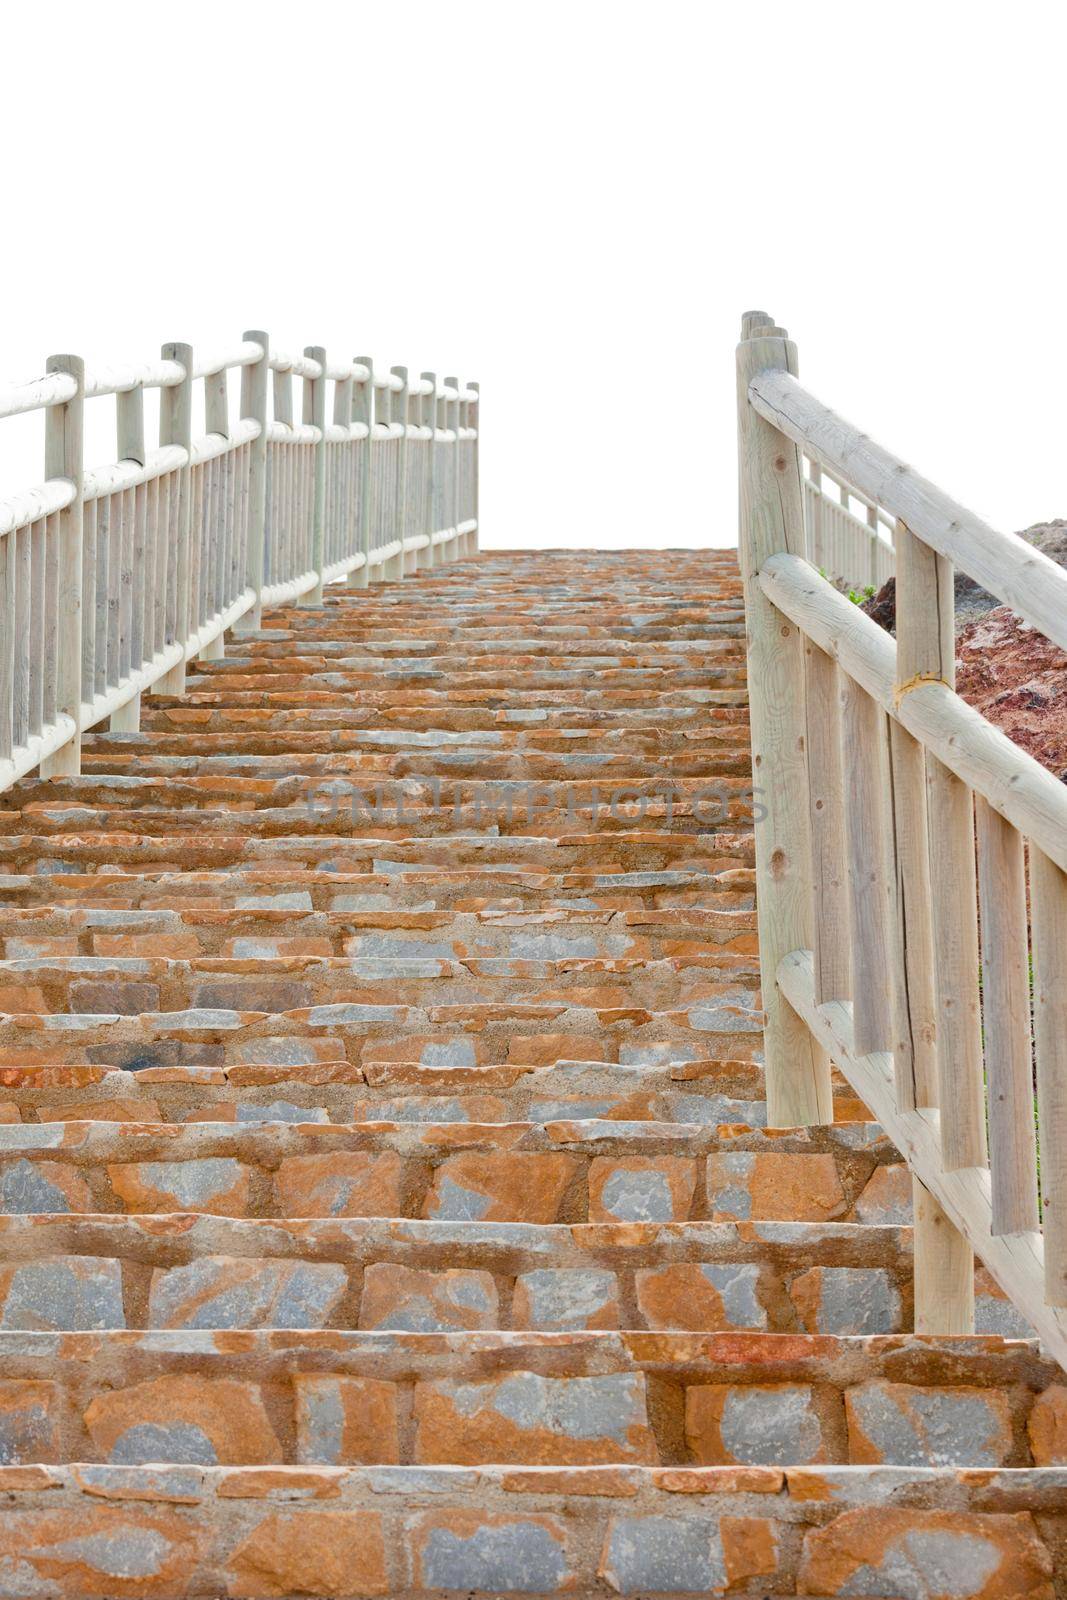 View from the bottom of a steep flight of brick steps with wooden railings leading up to the skyline